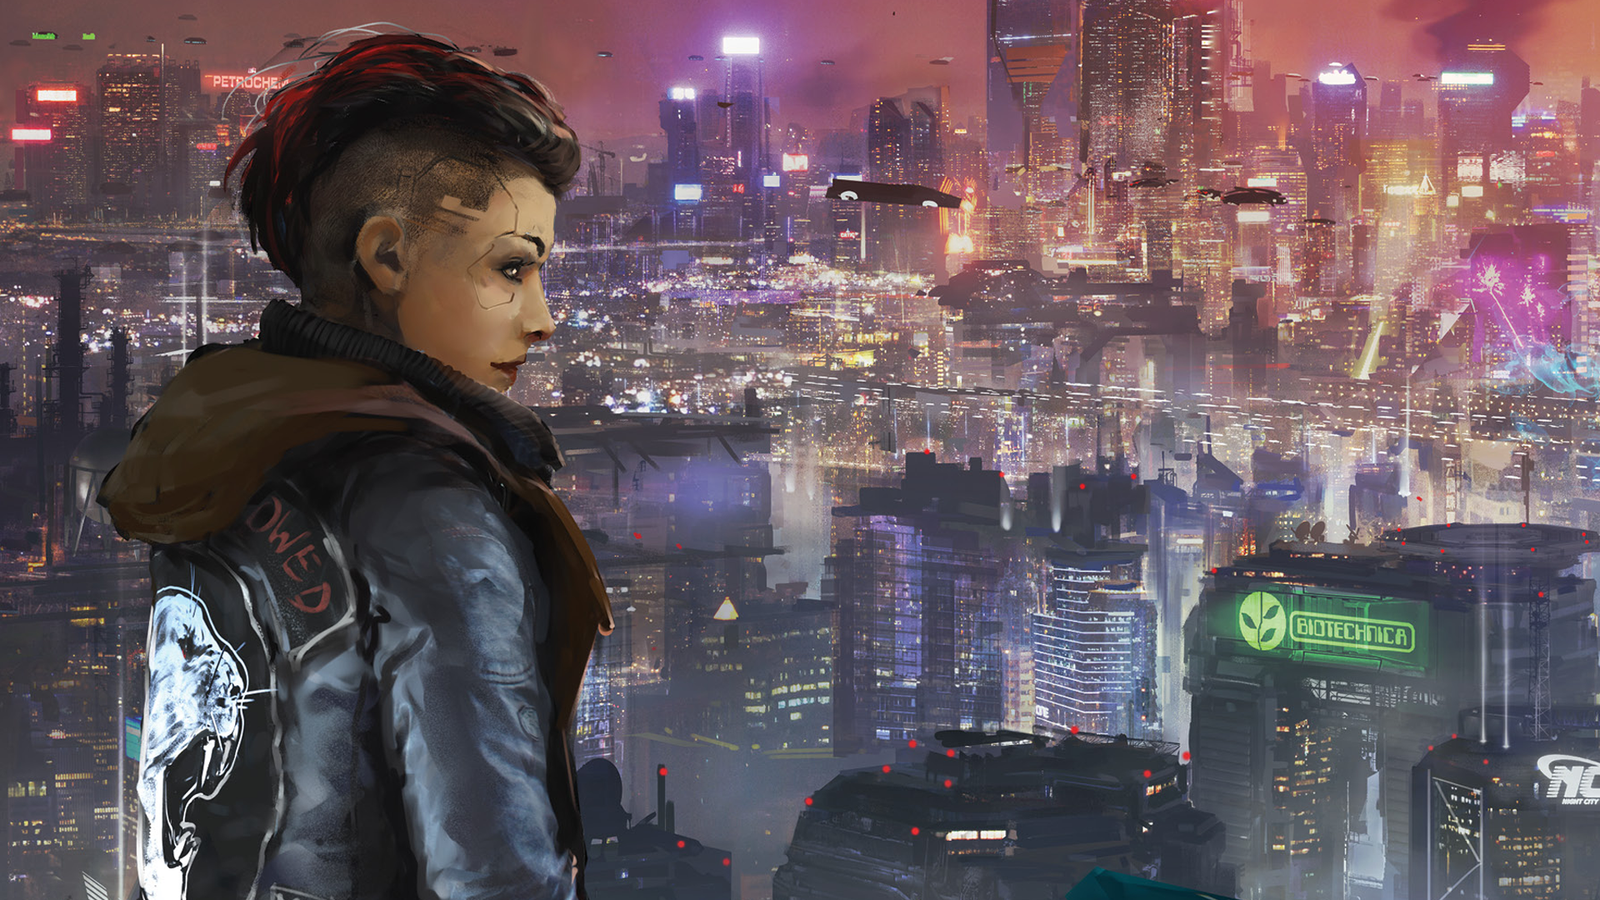 peave Rindende shilling Cyberpunk Red RPG review - timeless fashion, thrills and attitude make up  for slightly dated gameplay | Dicebreaker